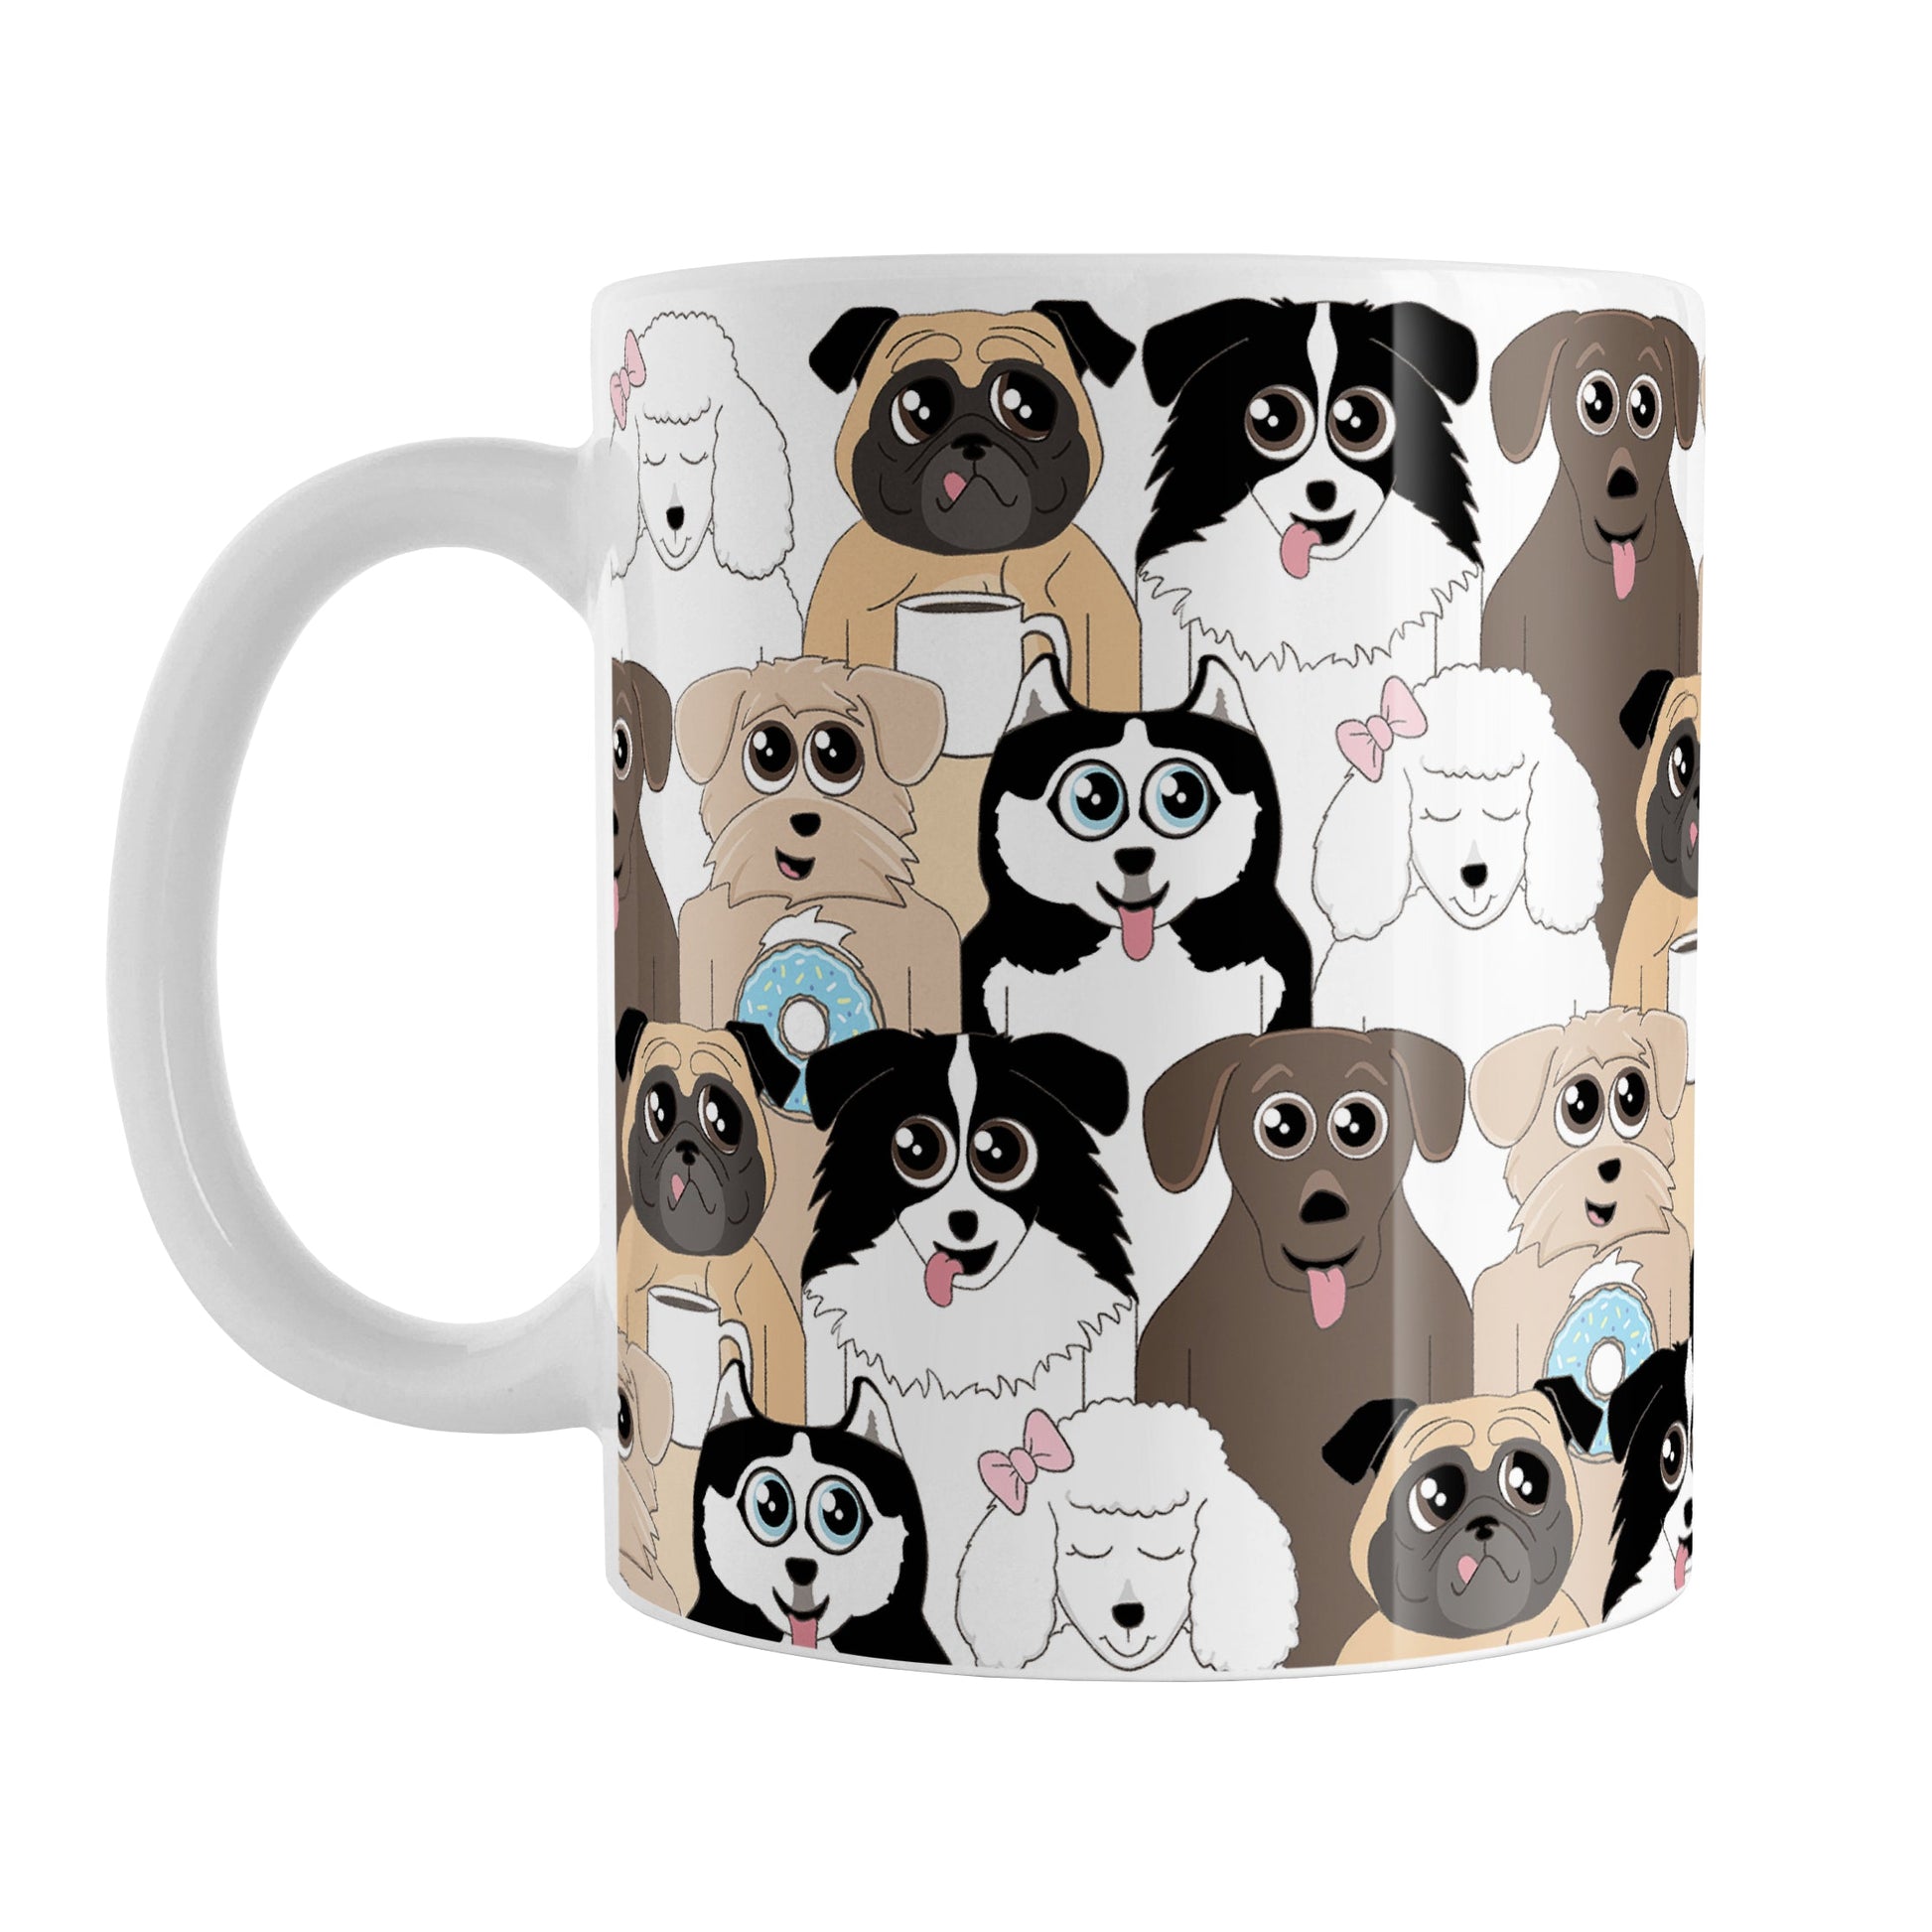 Cute Dog Stack Pattern Mug (11oz) at Amy's Coffee Mugs. Cute dogs mug with an illustrated pattern of different breeds of dogs with different fun expressions, with coffee and and donuts. This stacked pattern of dogs wraps around the ceramic mug to the handle.